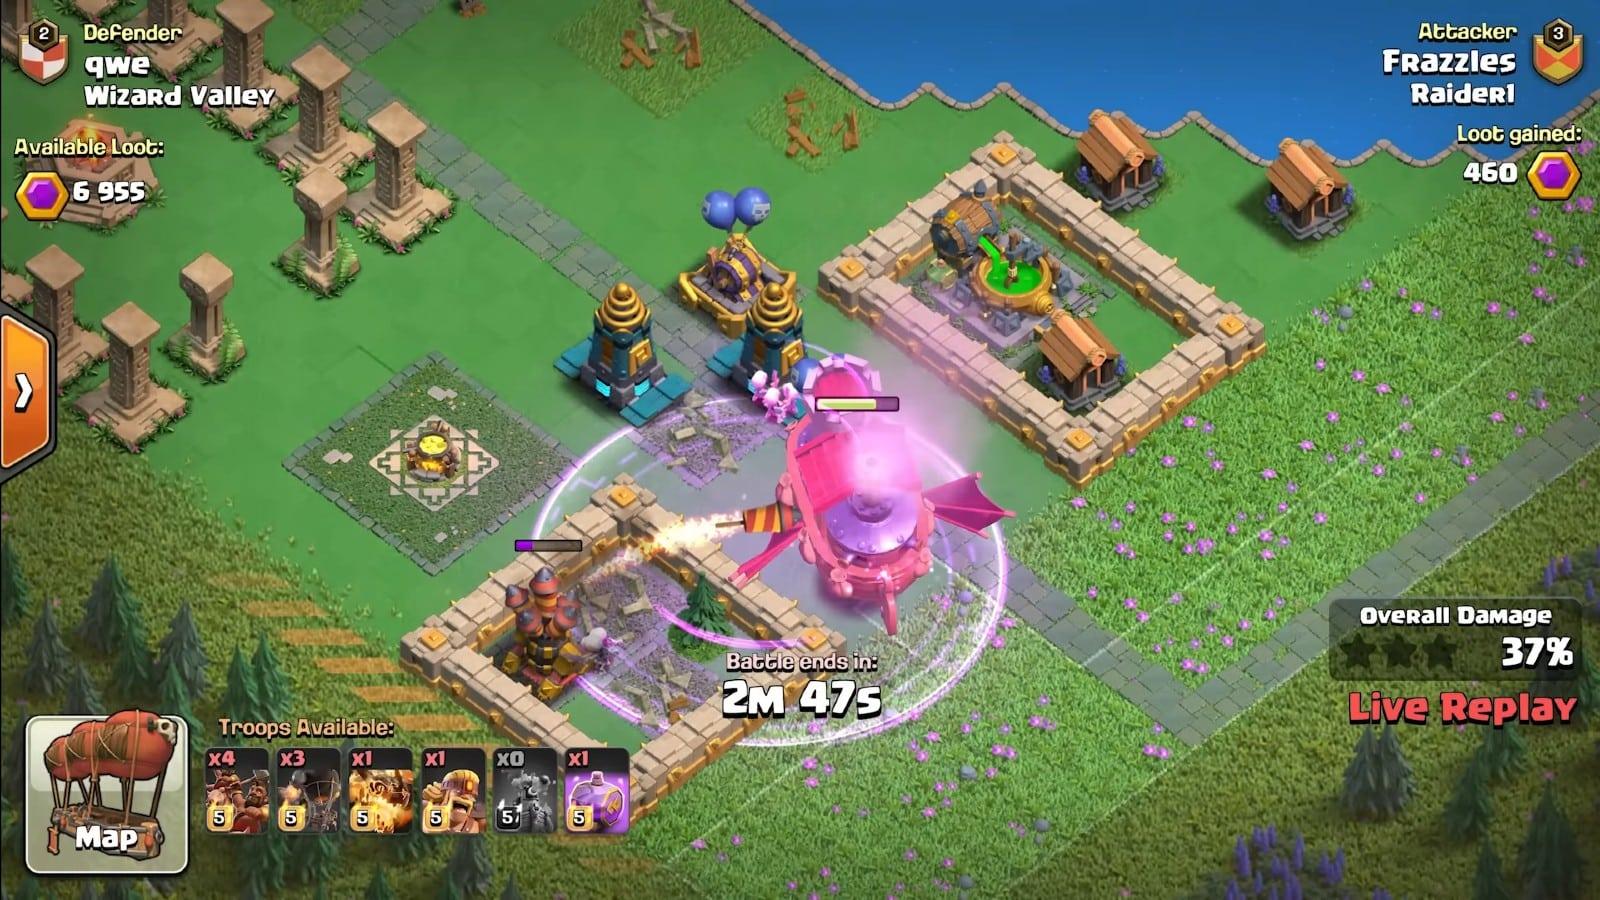 Clash of Clans update makes huge changes to army training.